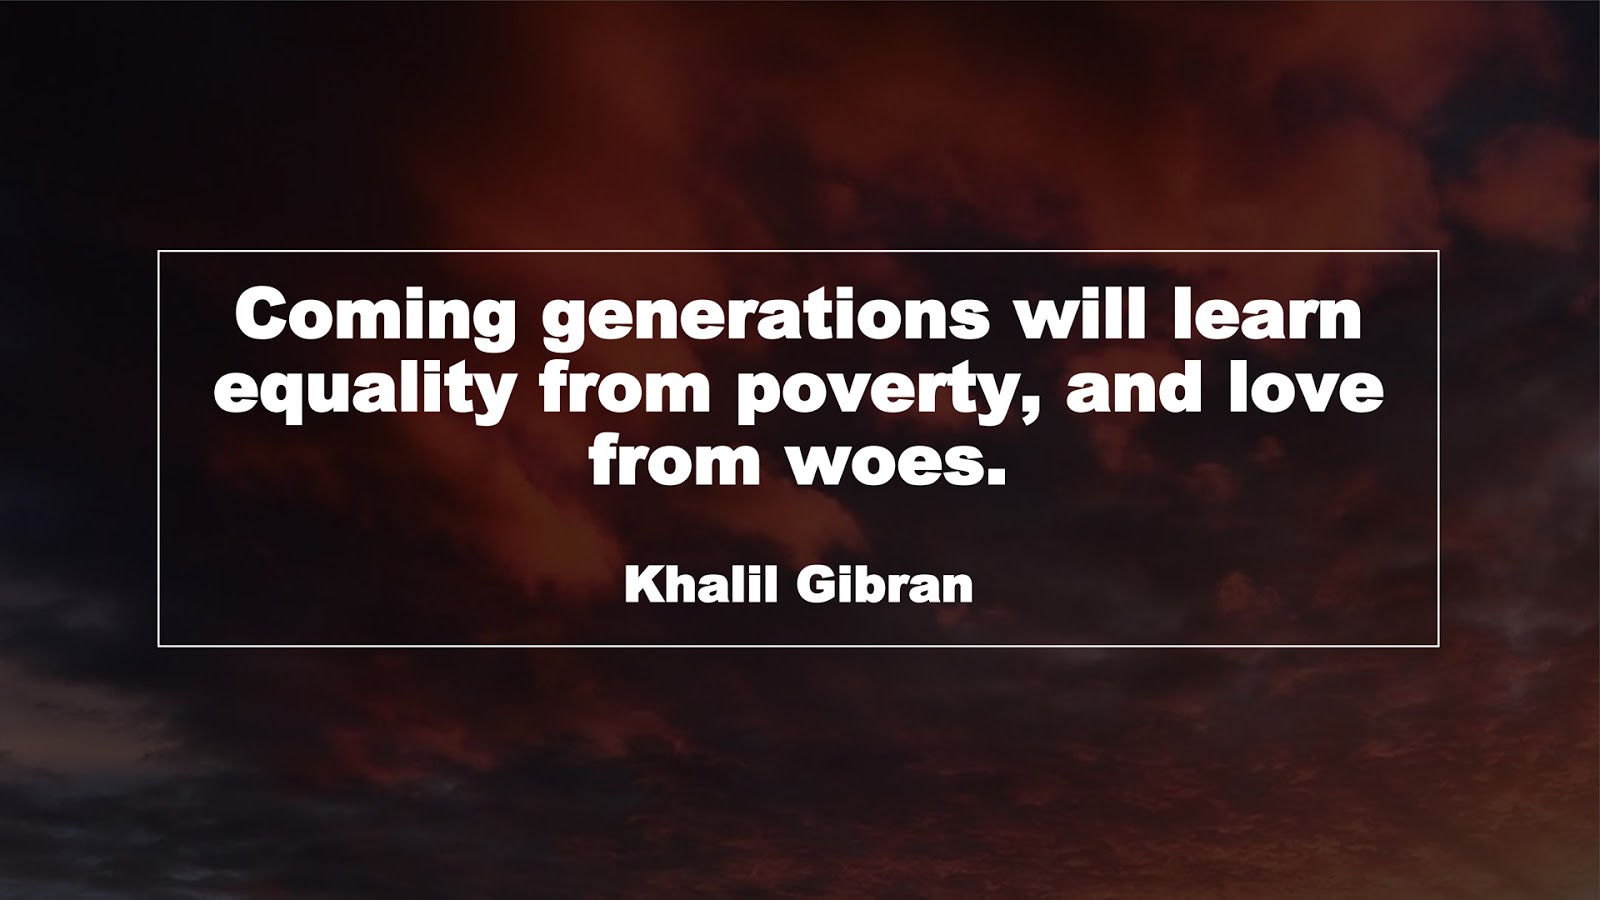 Coming generations will learn equality from poverty, and love from woes. (Khalil Gibran)